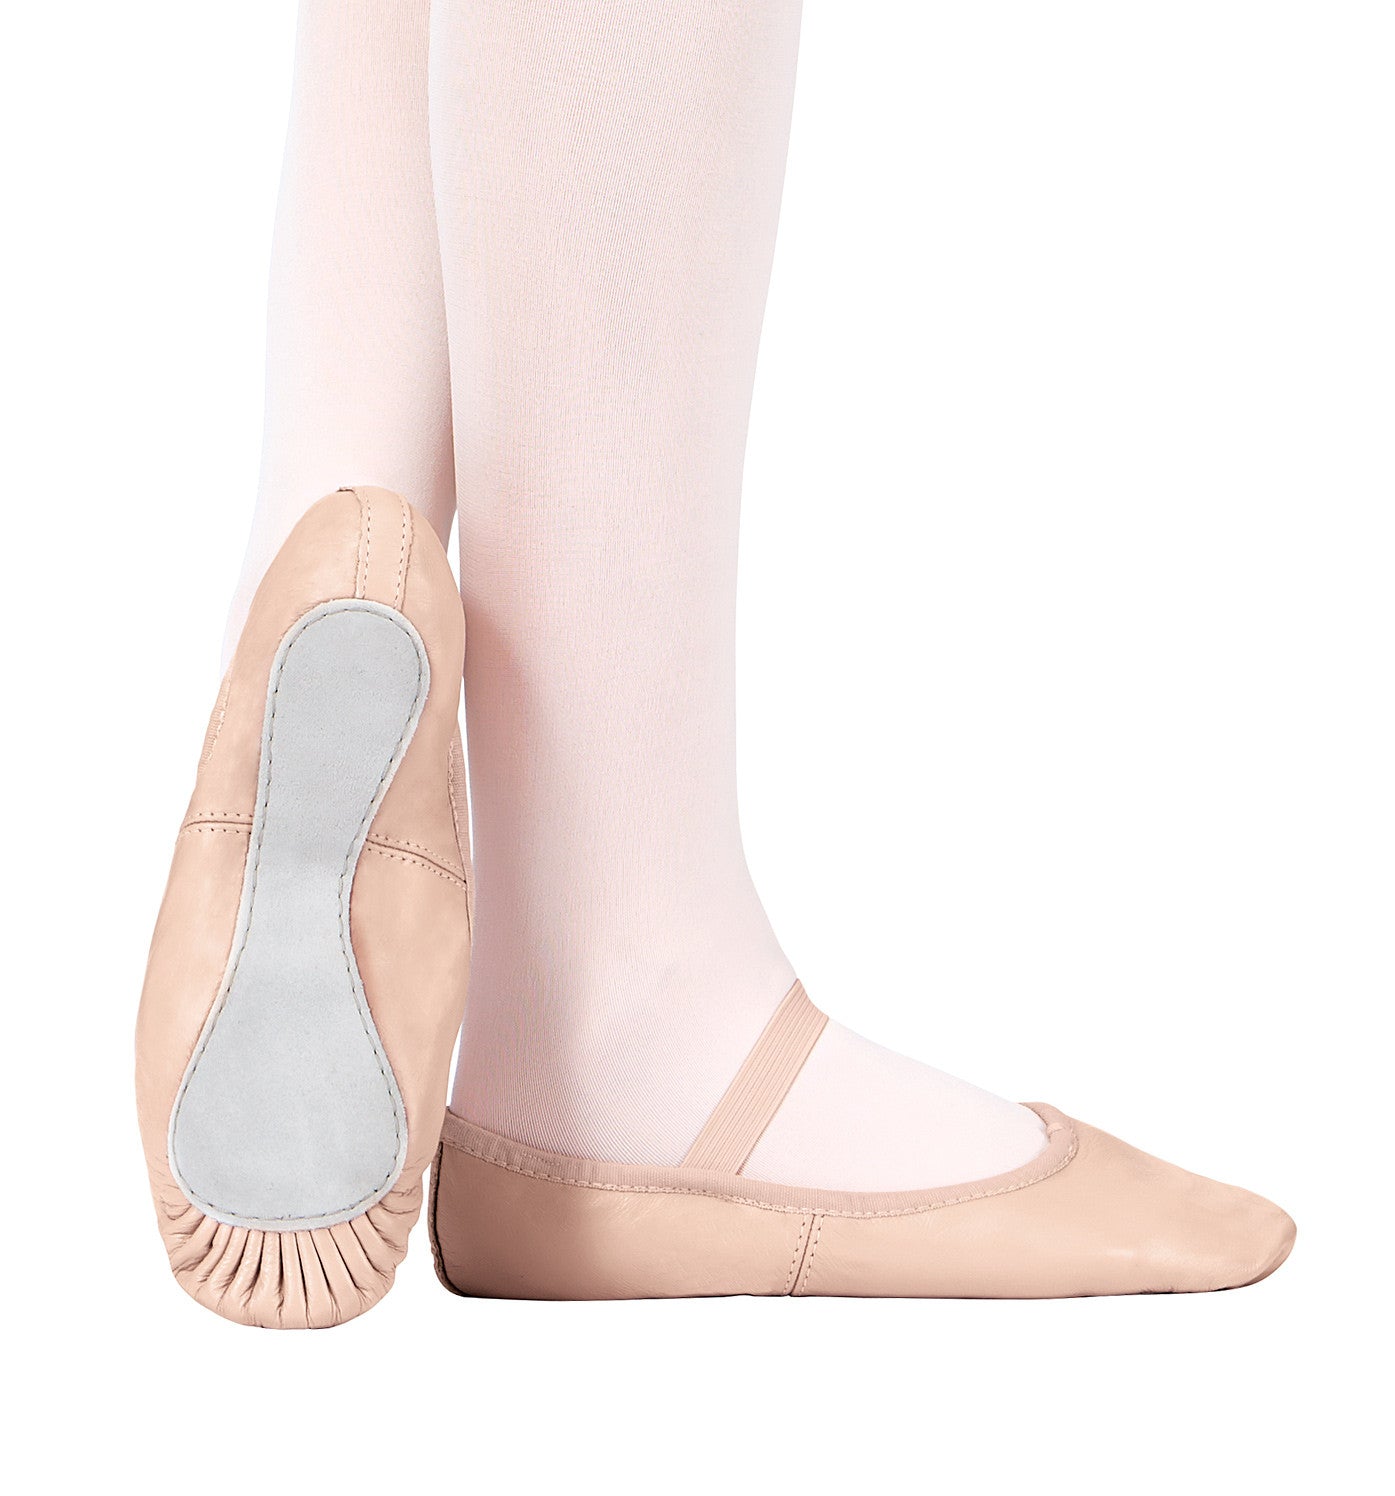 Premium Leather Full Sole Ballet Shoes for Girls